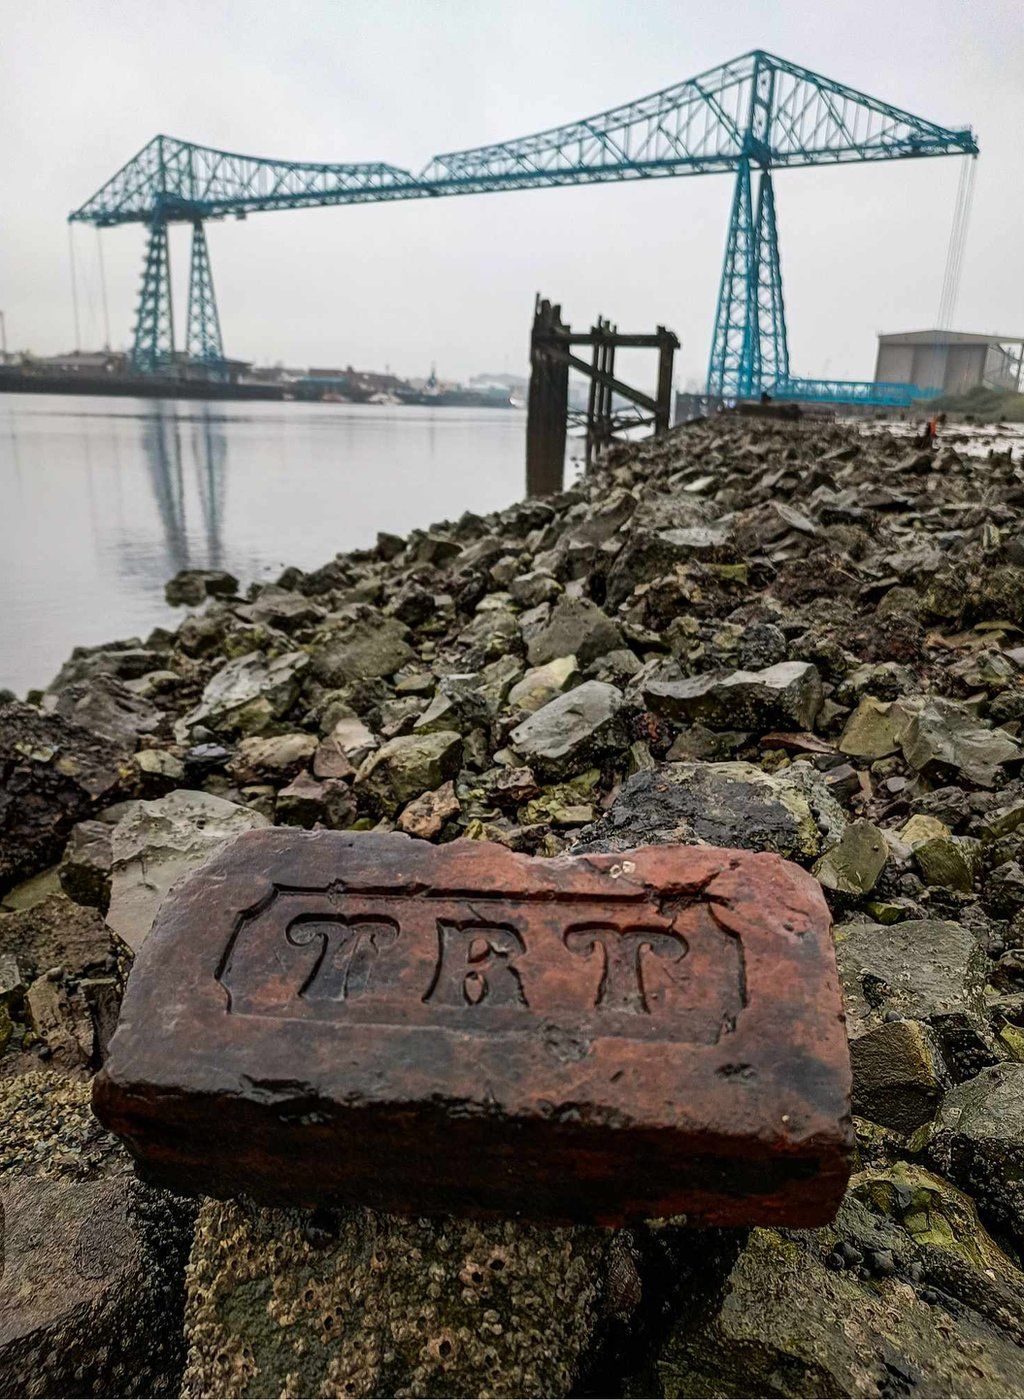 Brick on the foreshore of the River Tees with the transporter bridge in the background